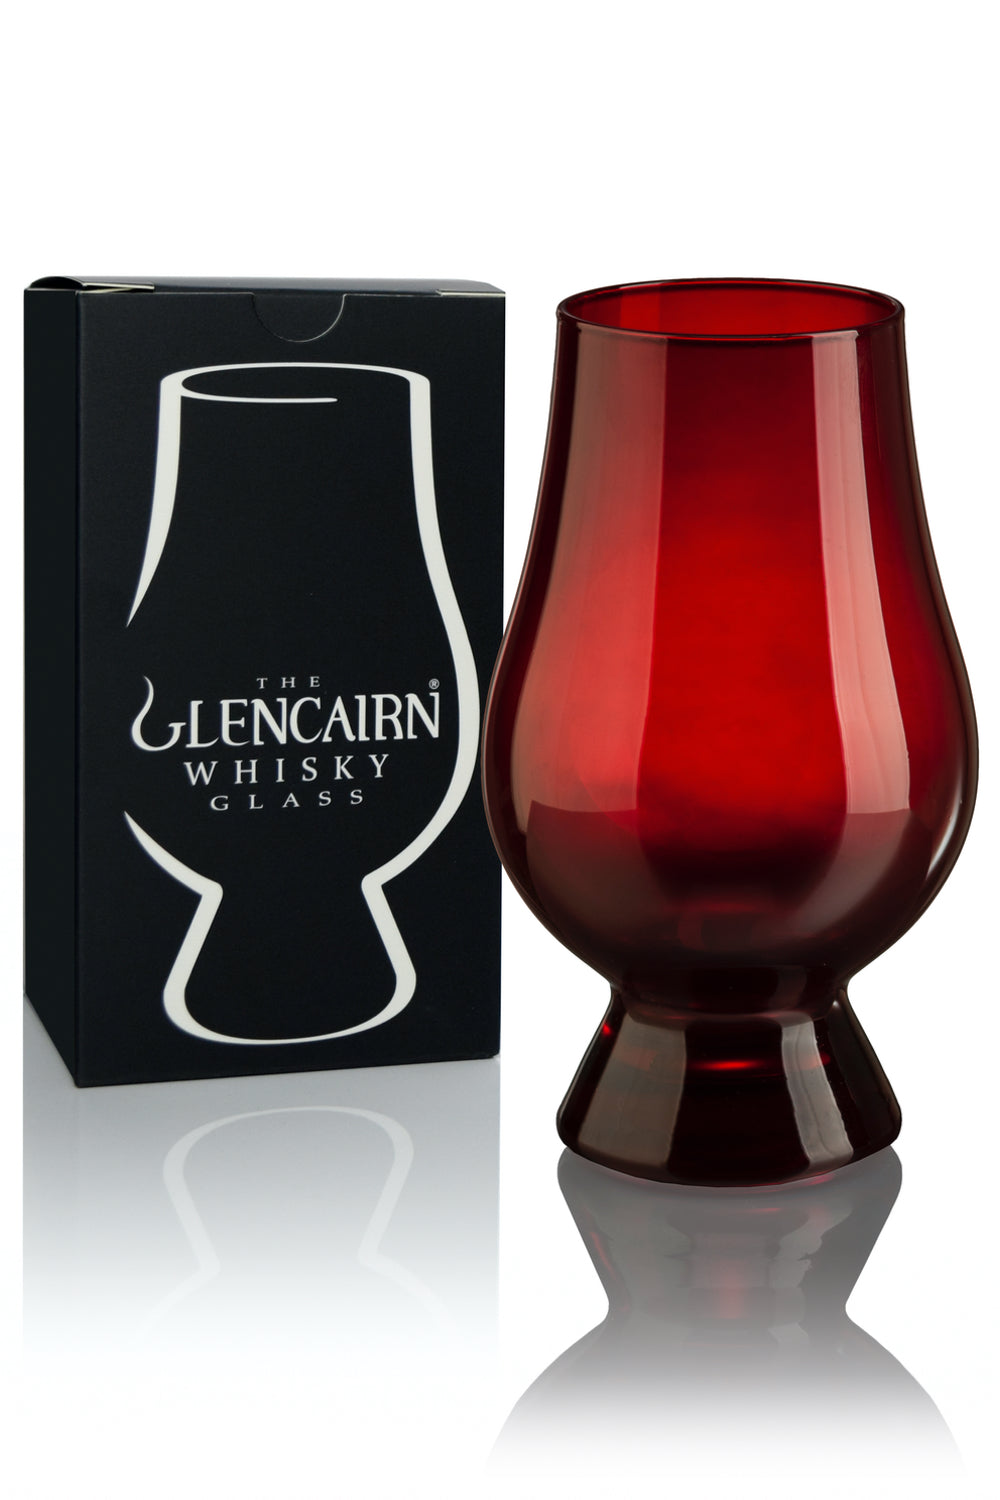 Glencairn Crystal Original RED Whisky Glass with Gift Box